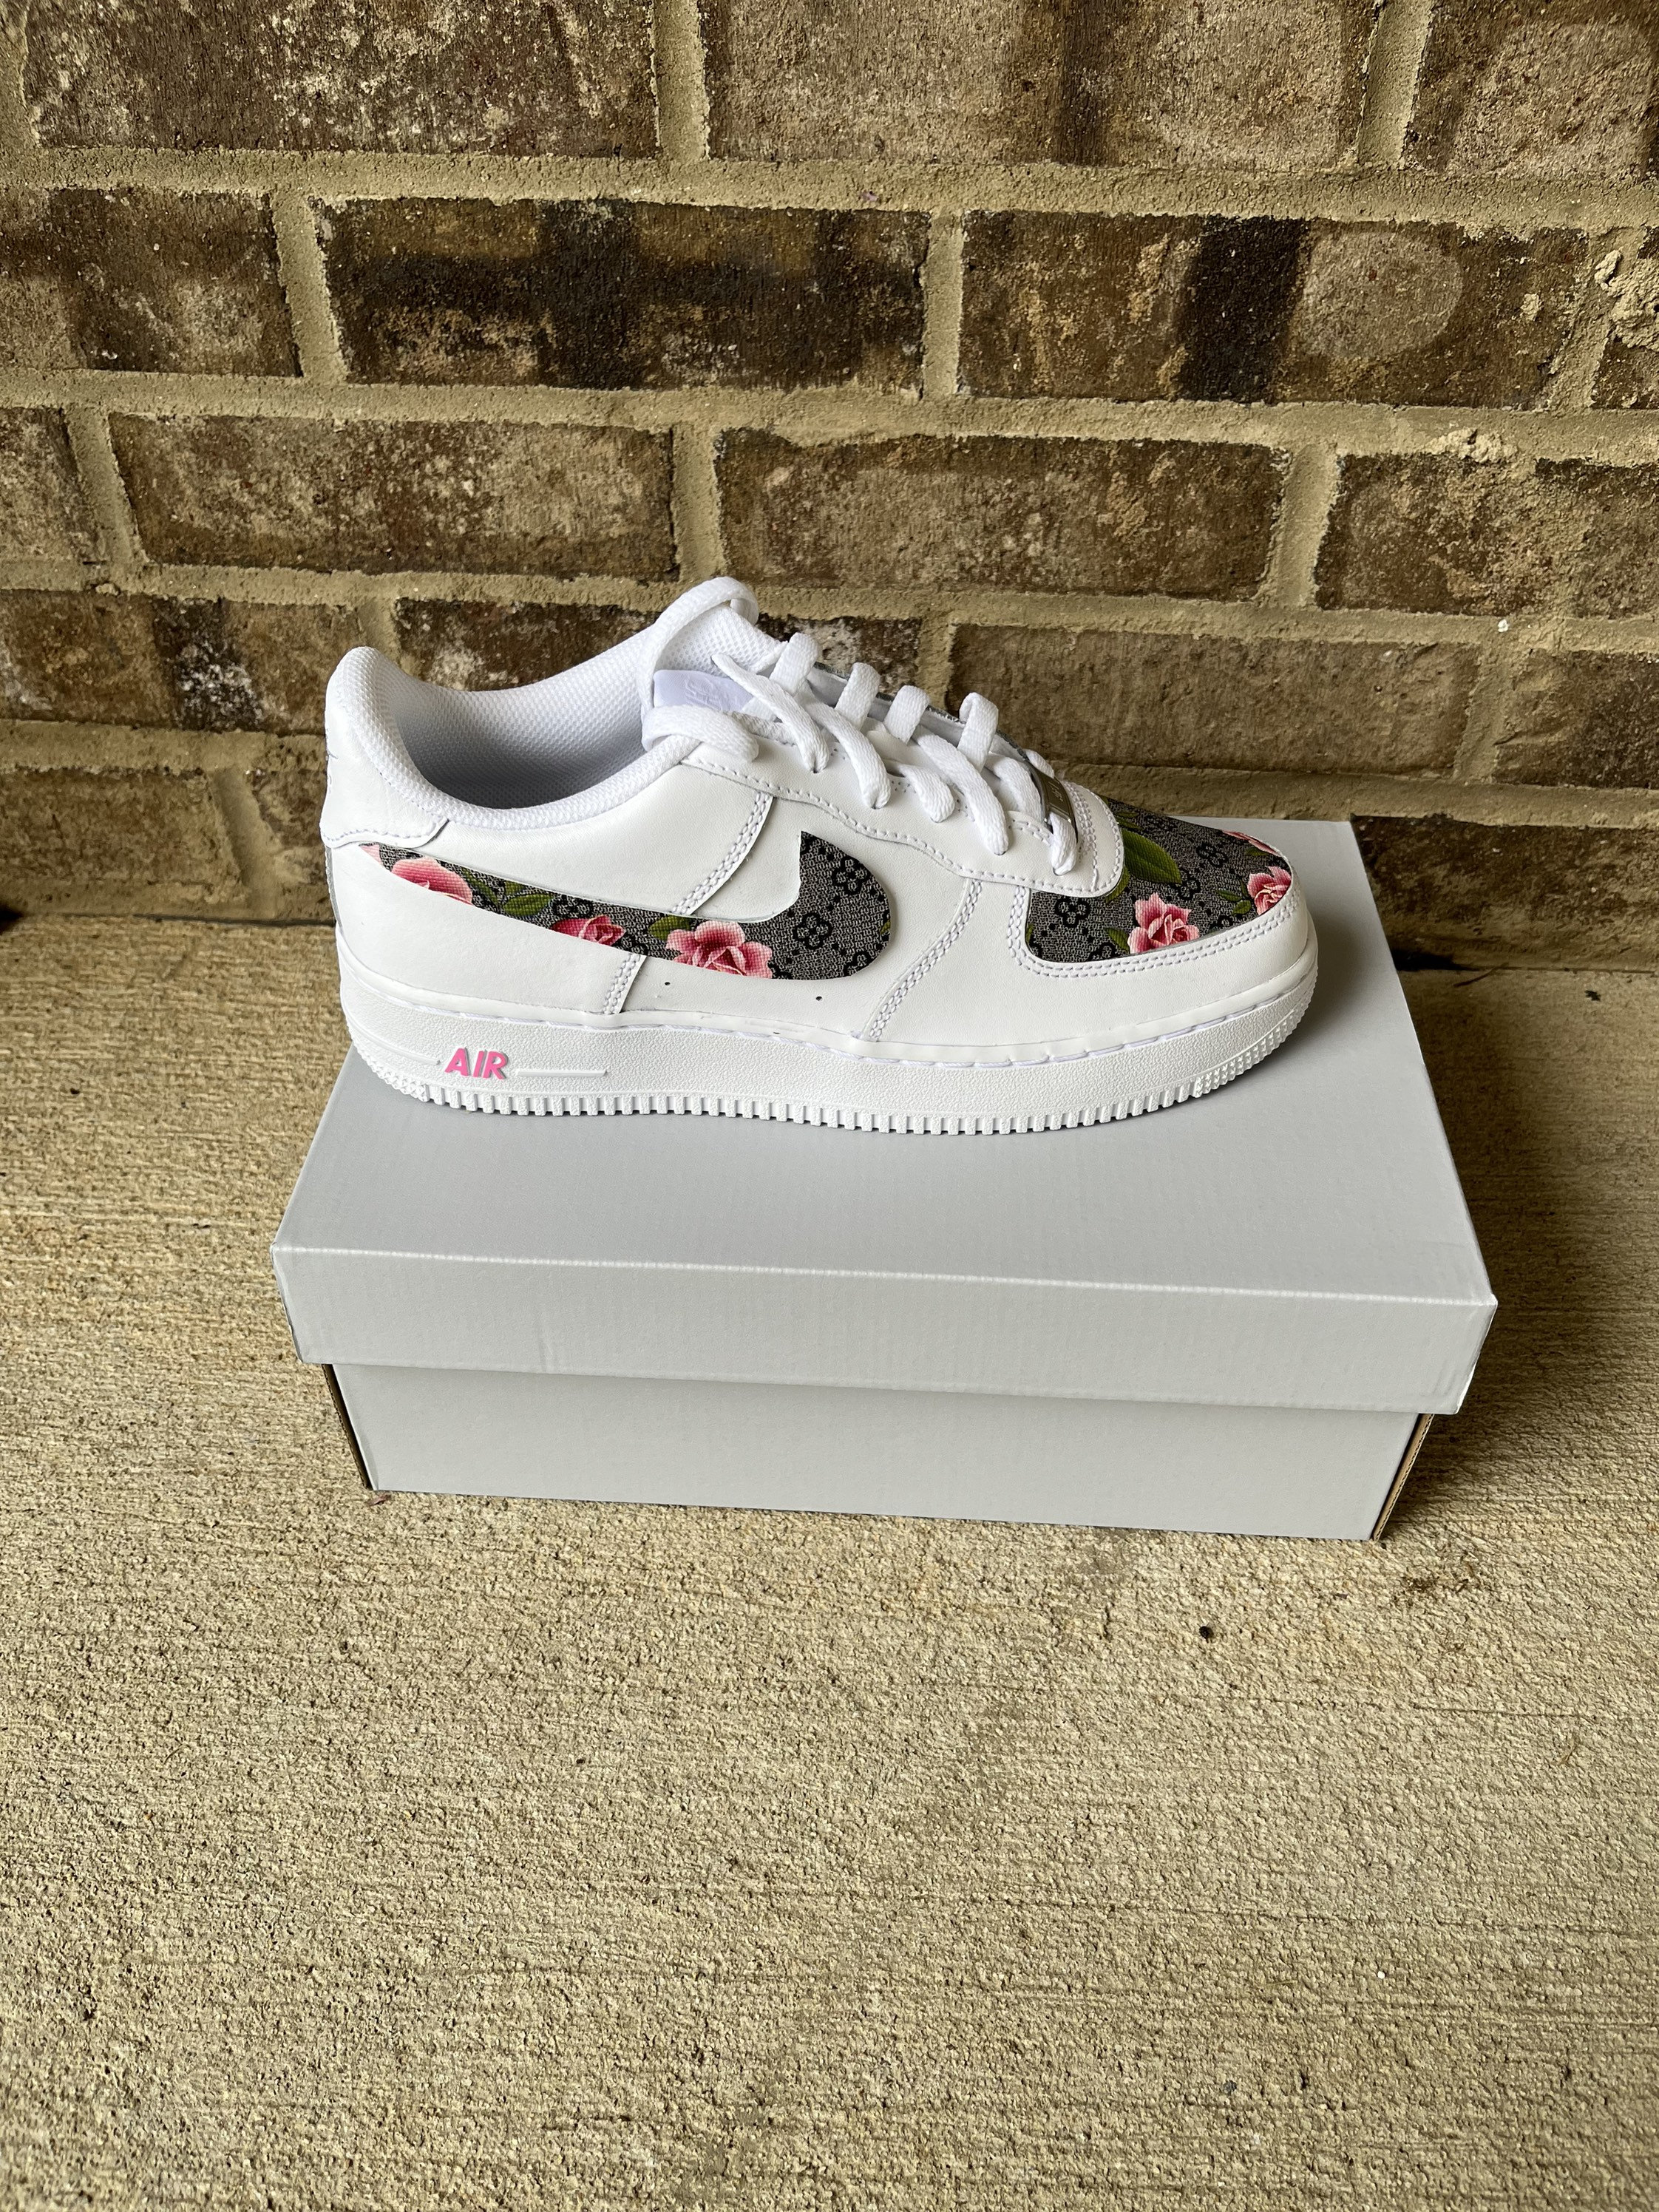 Gucci Air Force 1 - Etsy